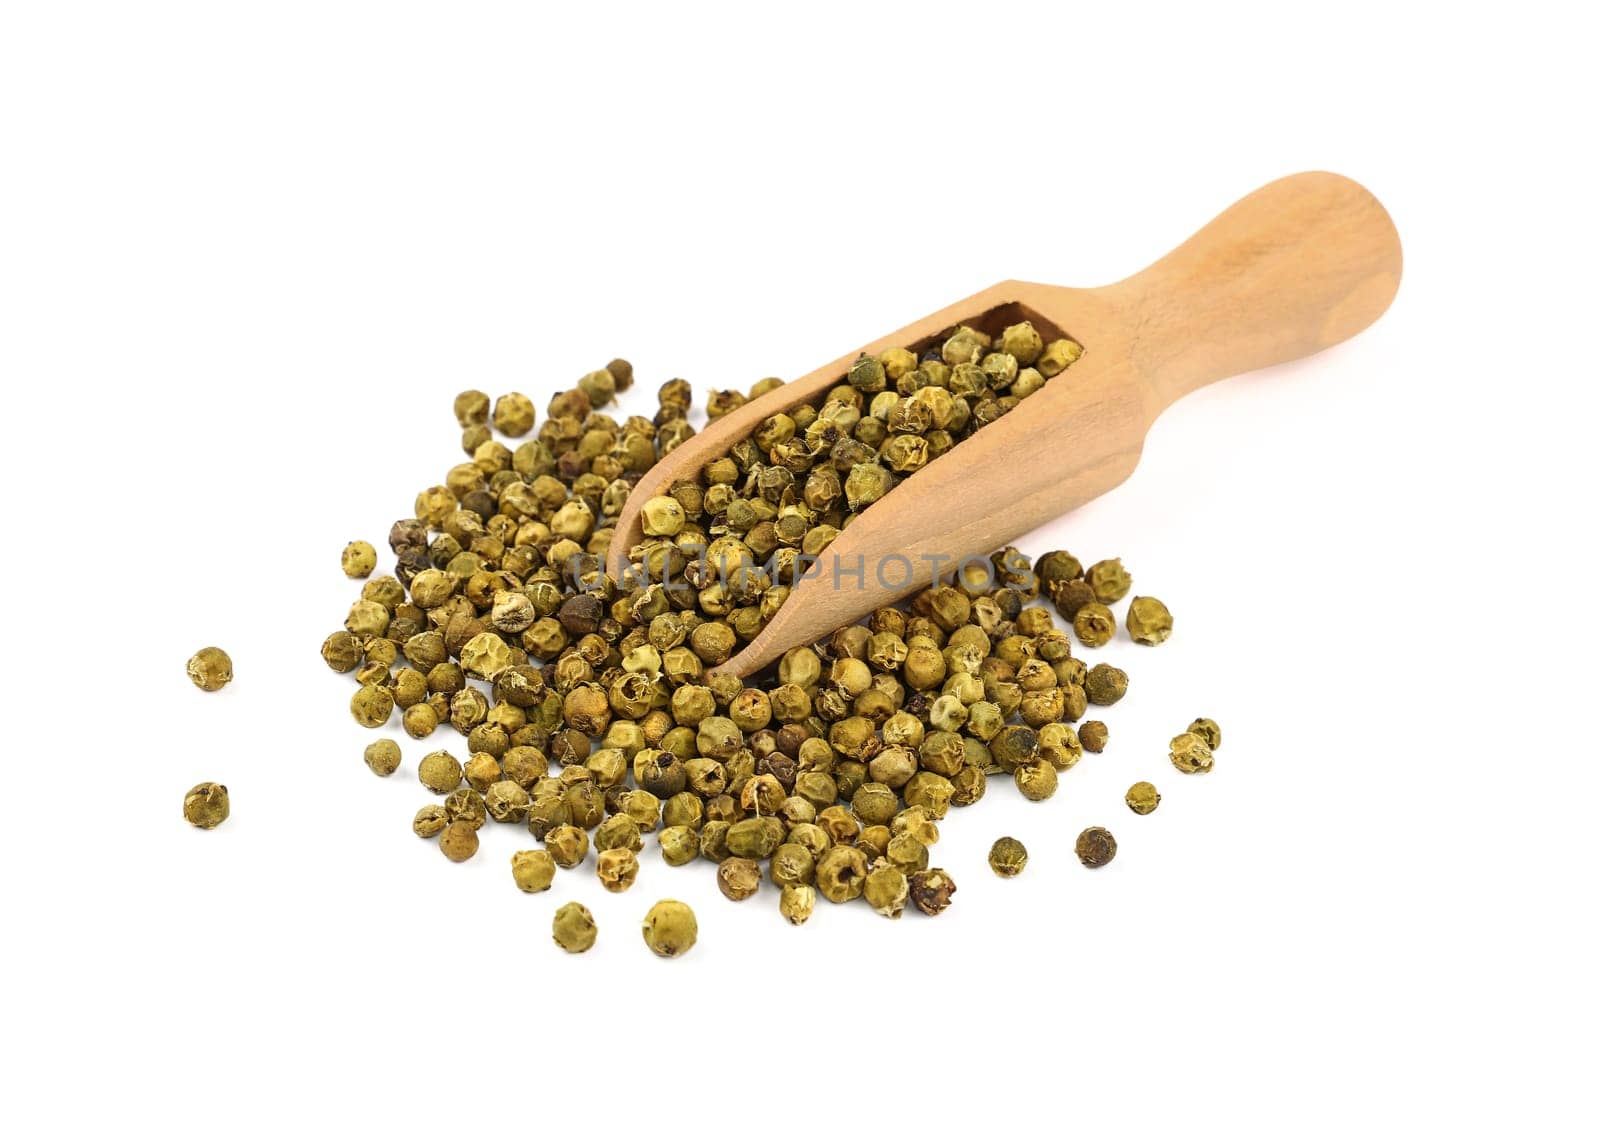 Close up one wooden scoop full of green pepper peppercorns and heap of peppercorns spilled and spread around isolated on white background, high angle view